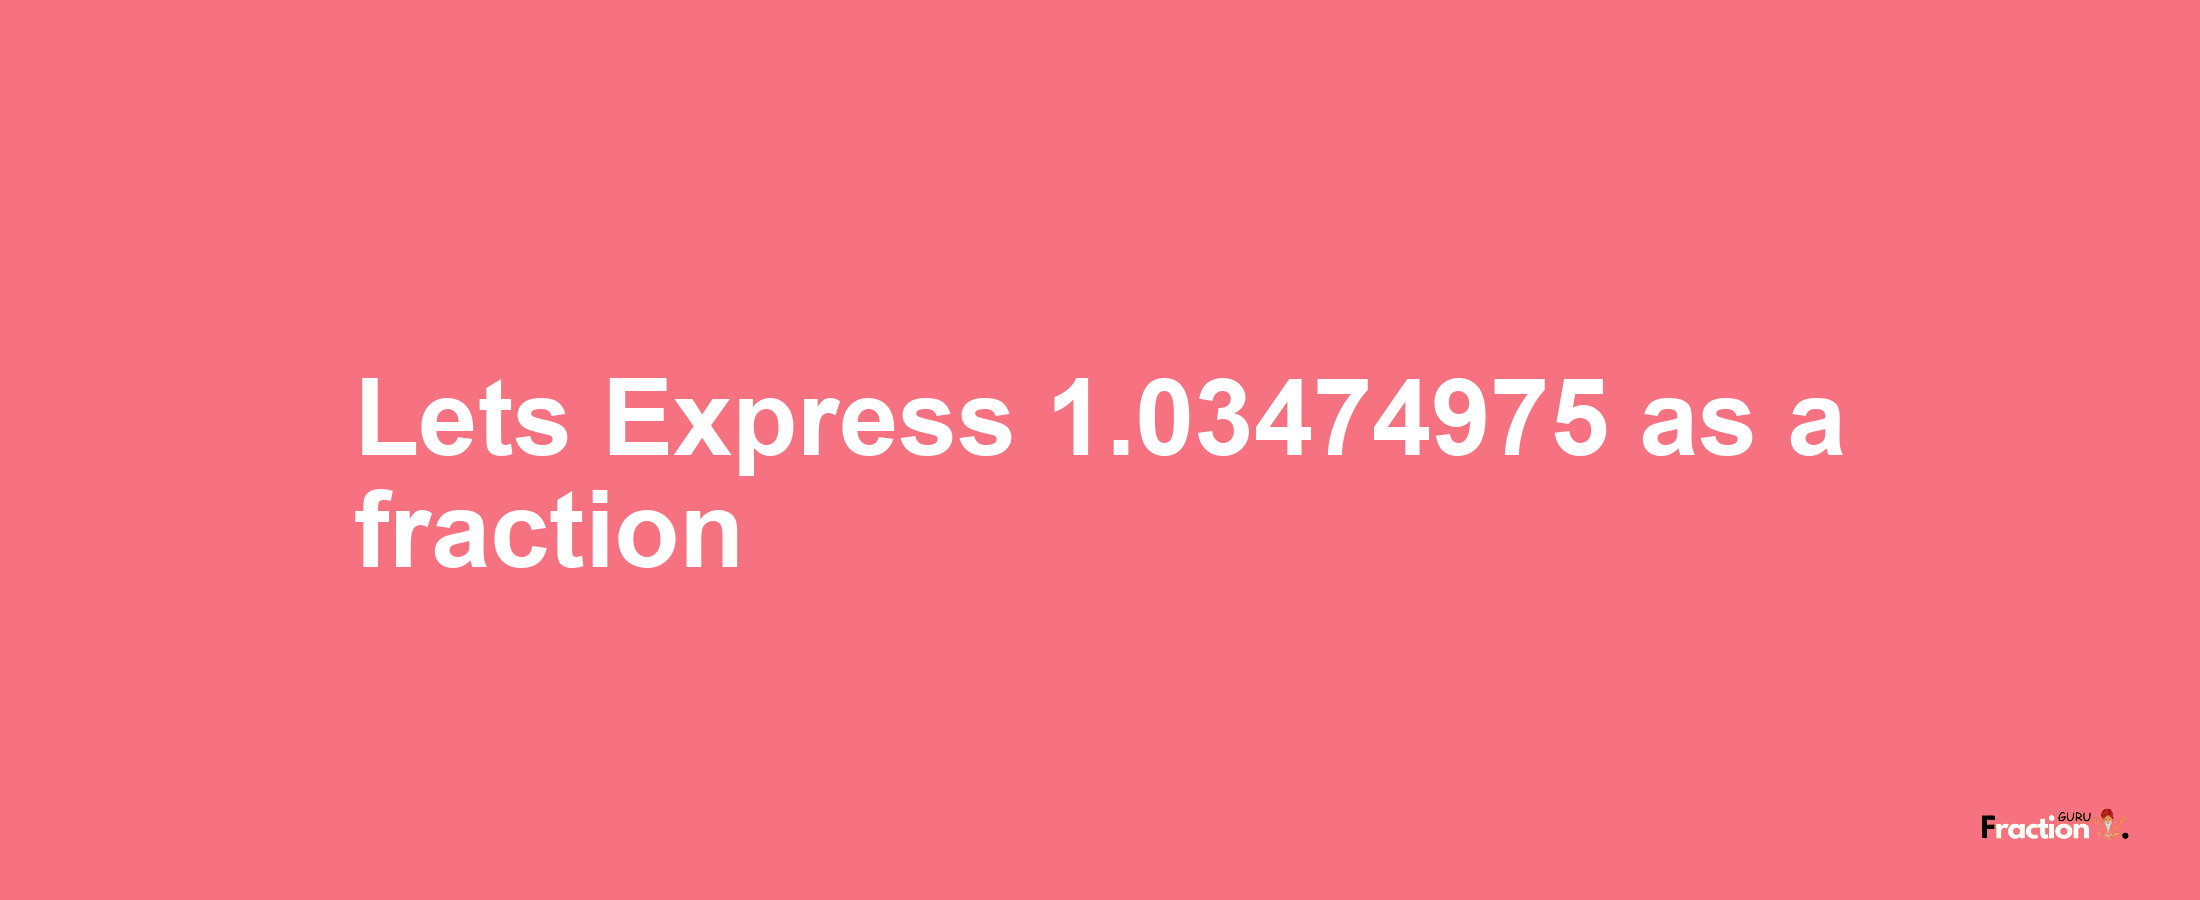 Lets Express 1.03474975 as afraction